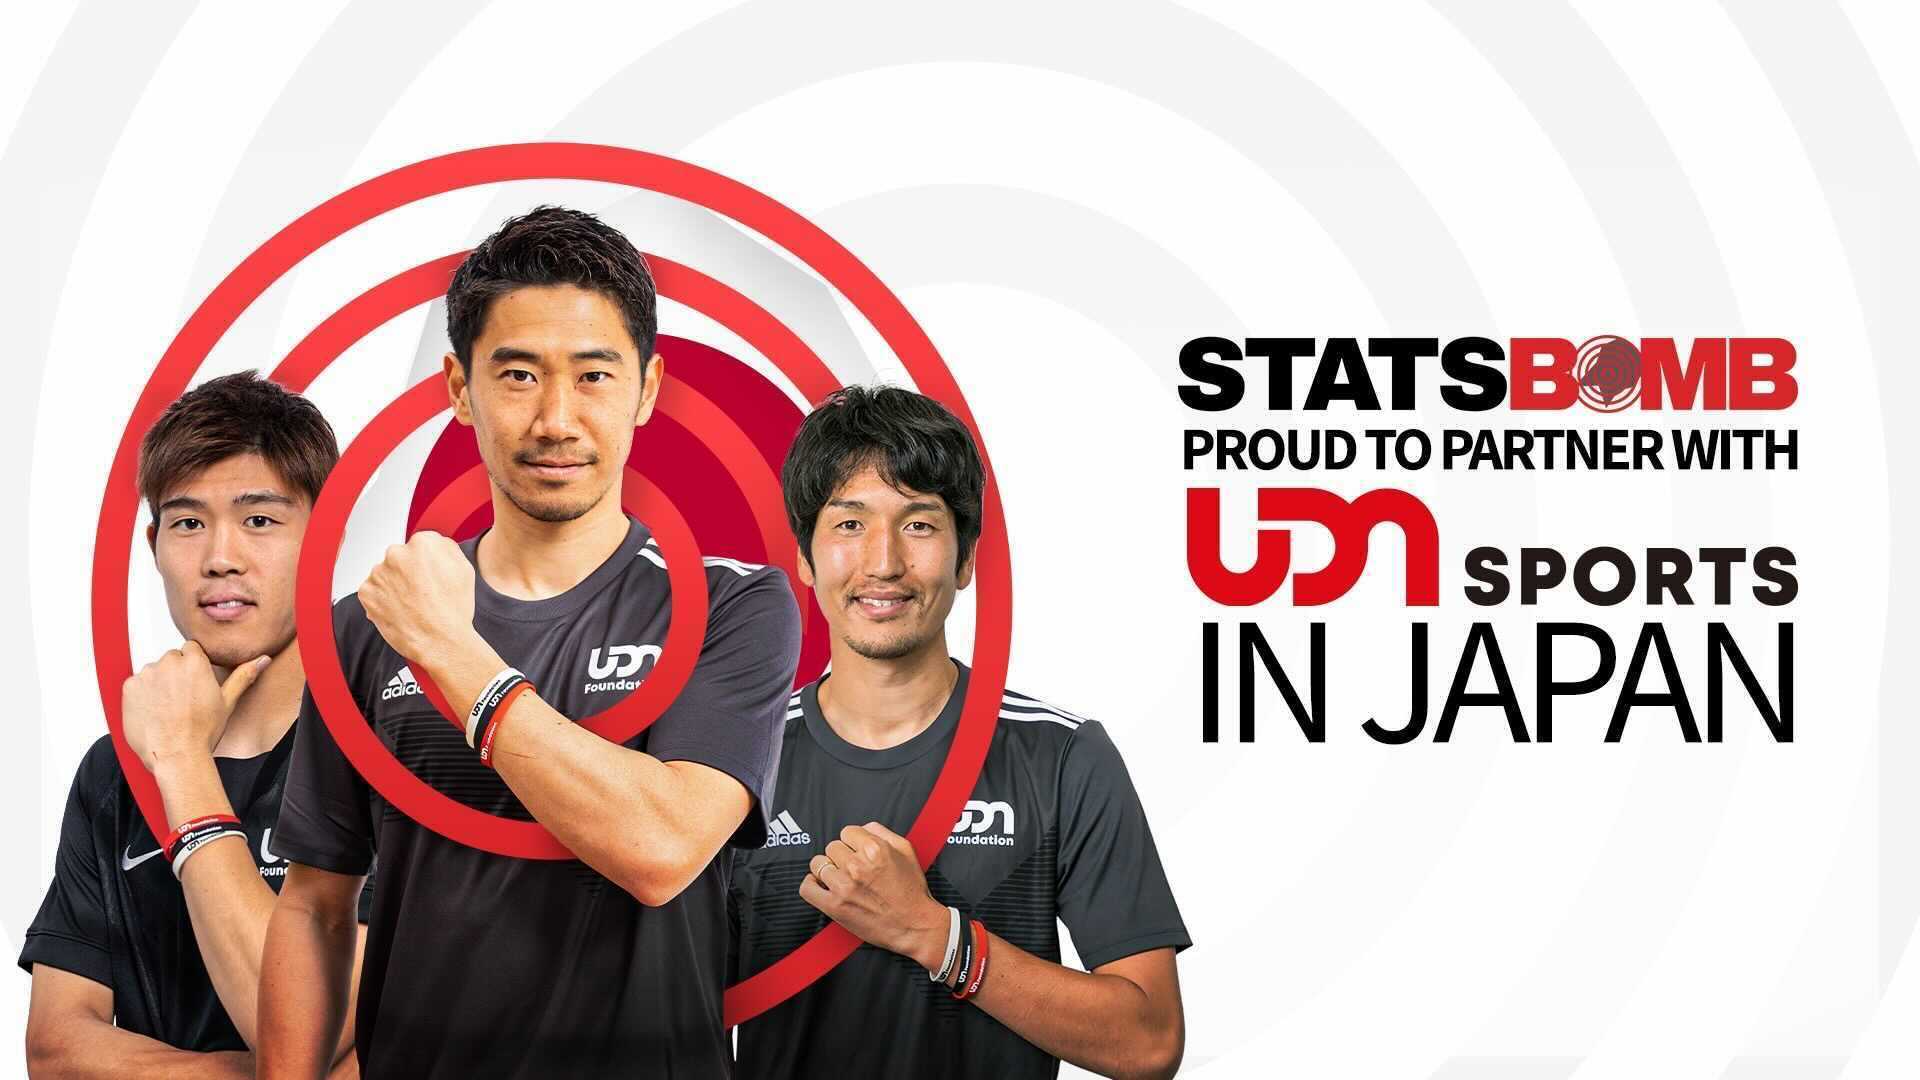 StatsBomb enter a new market by partnering with UDN Sports of Japan